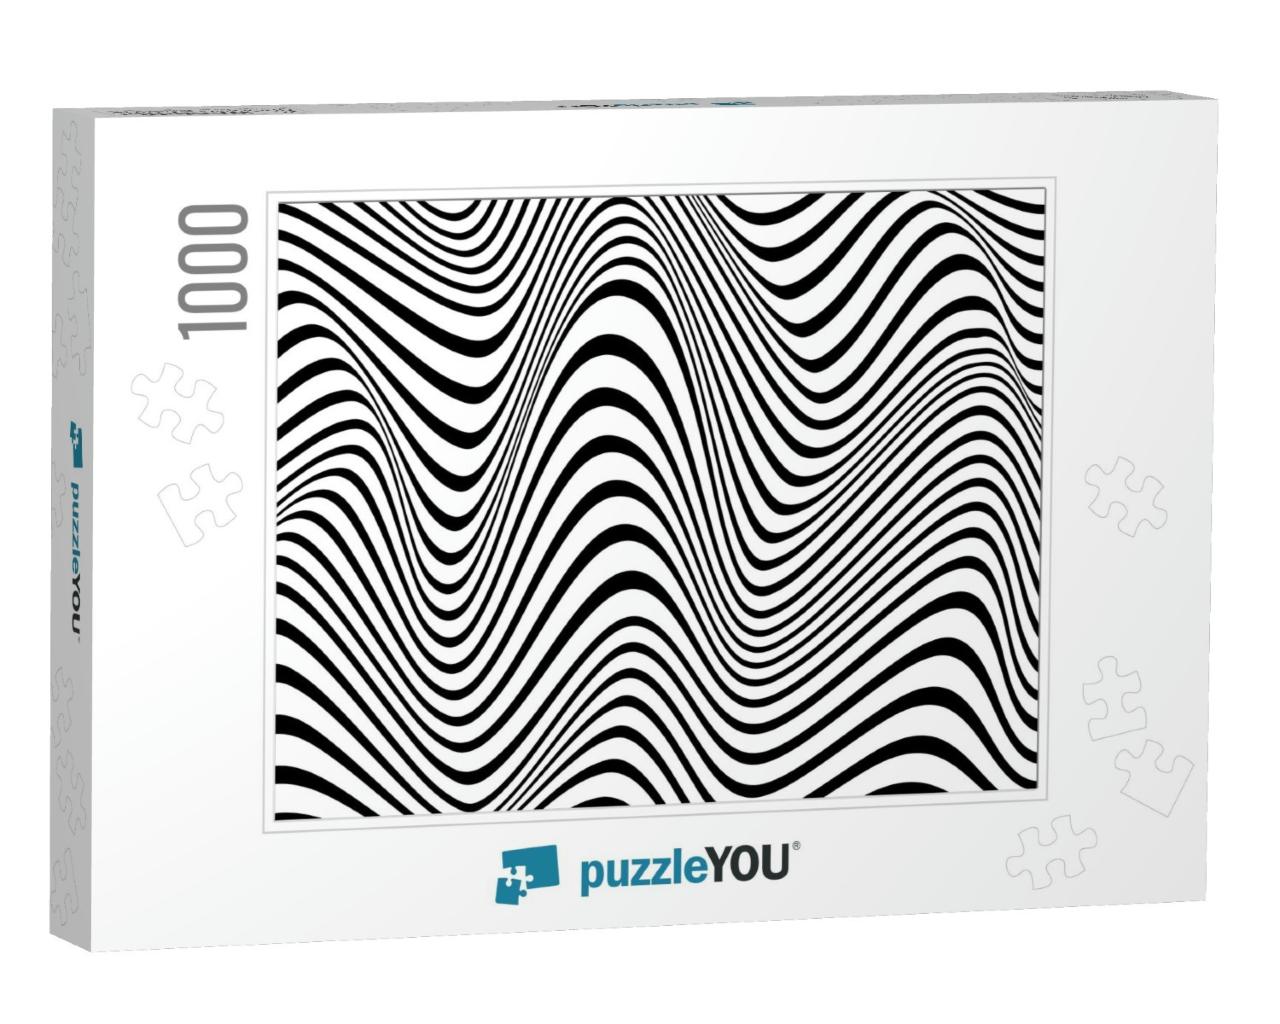 Black & White Stripes. Psychedelic, Hypnotic Line Abstrac... Jigsaw Puzzle with 1000 pieces